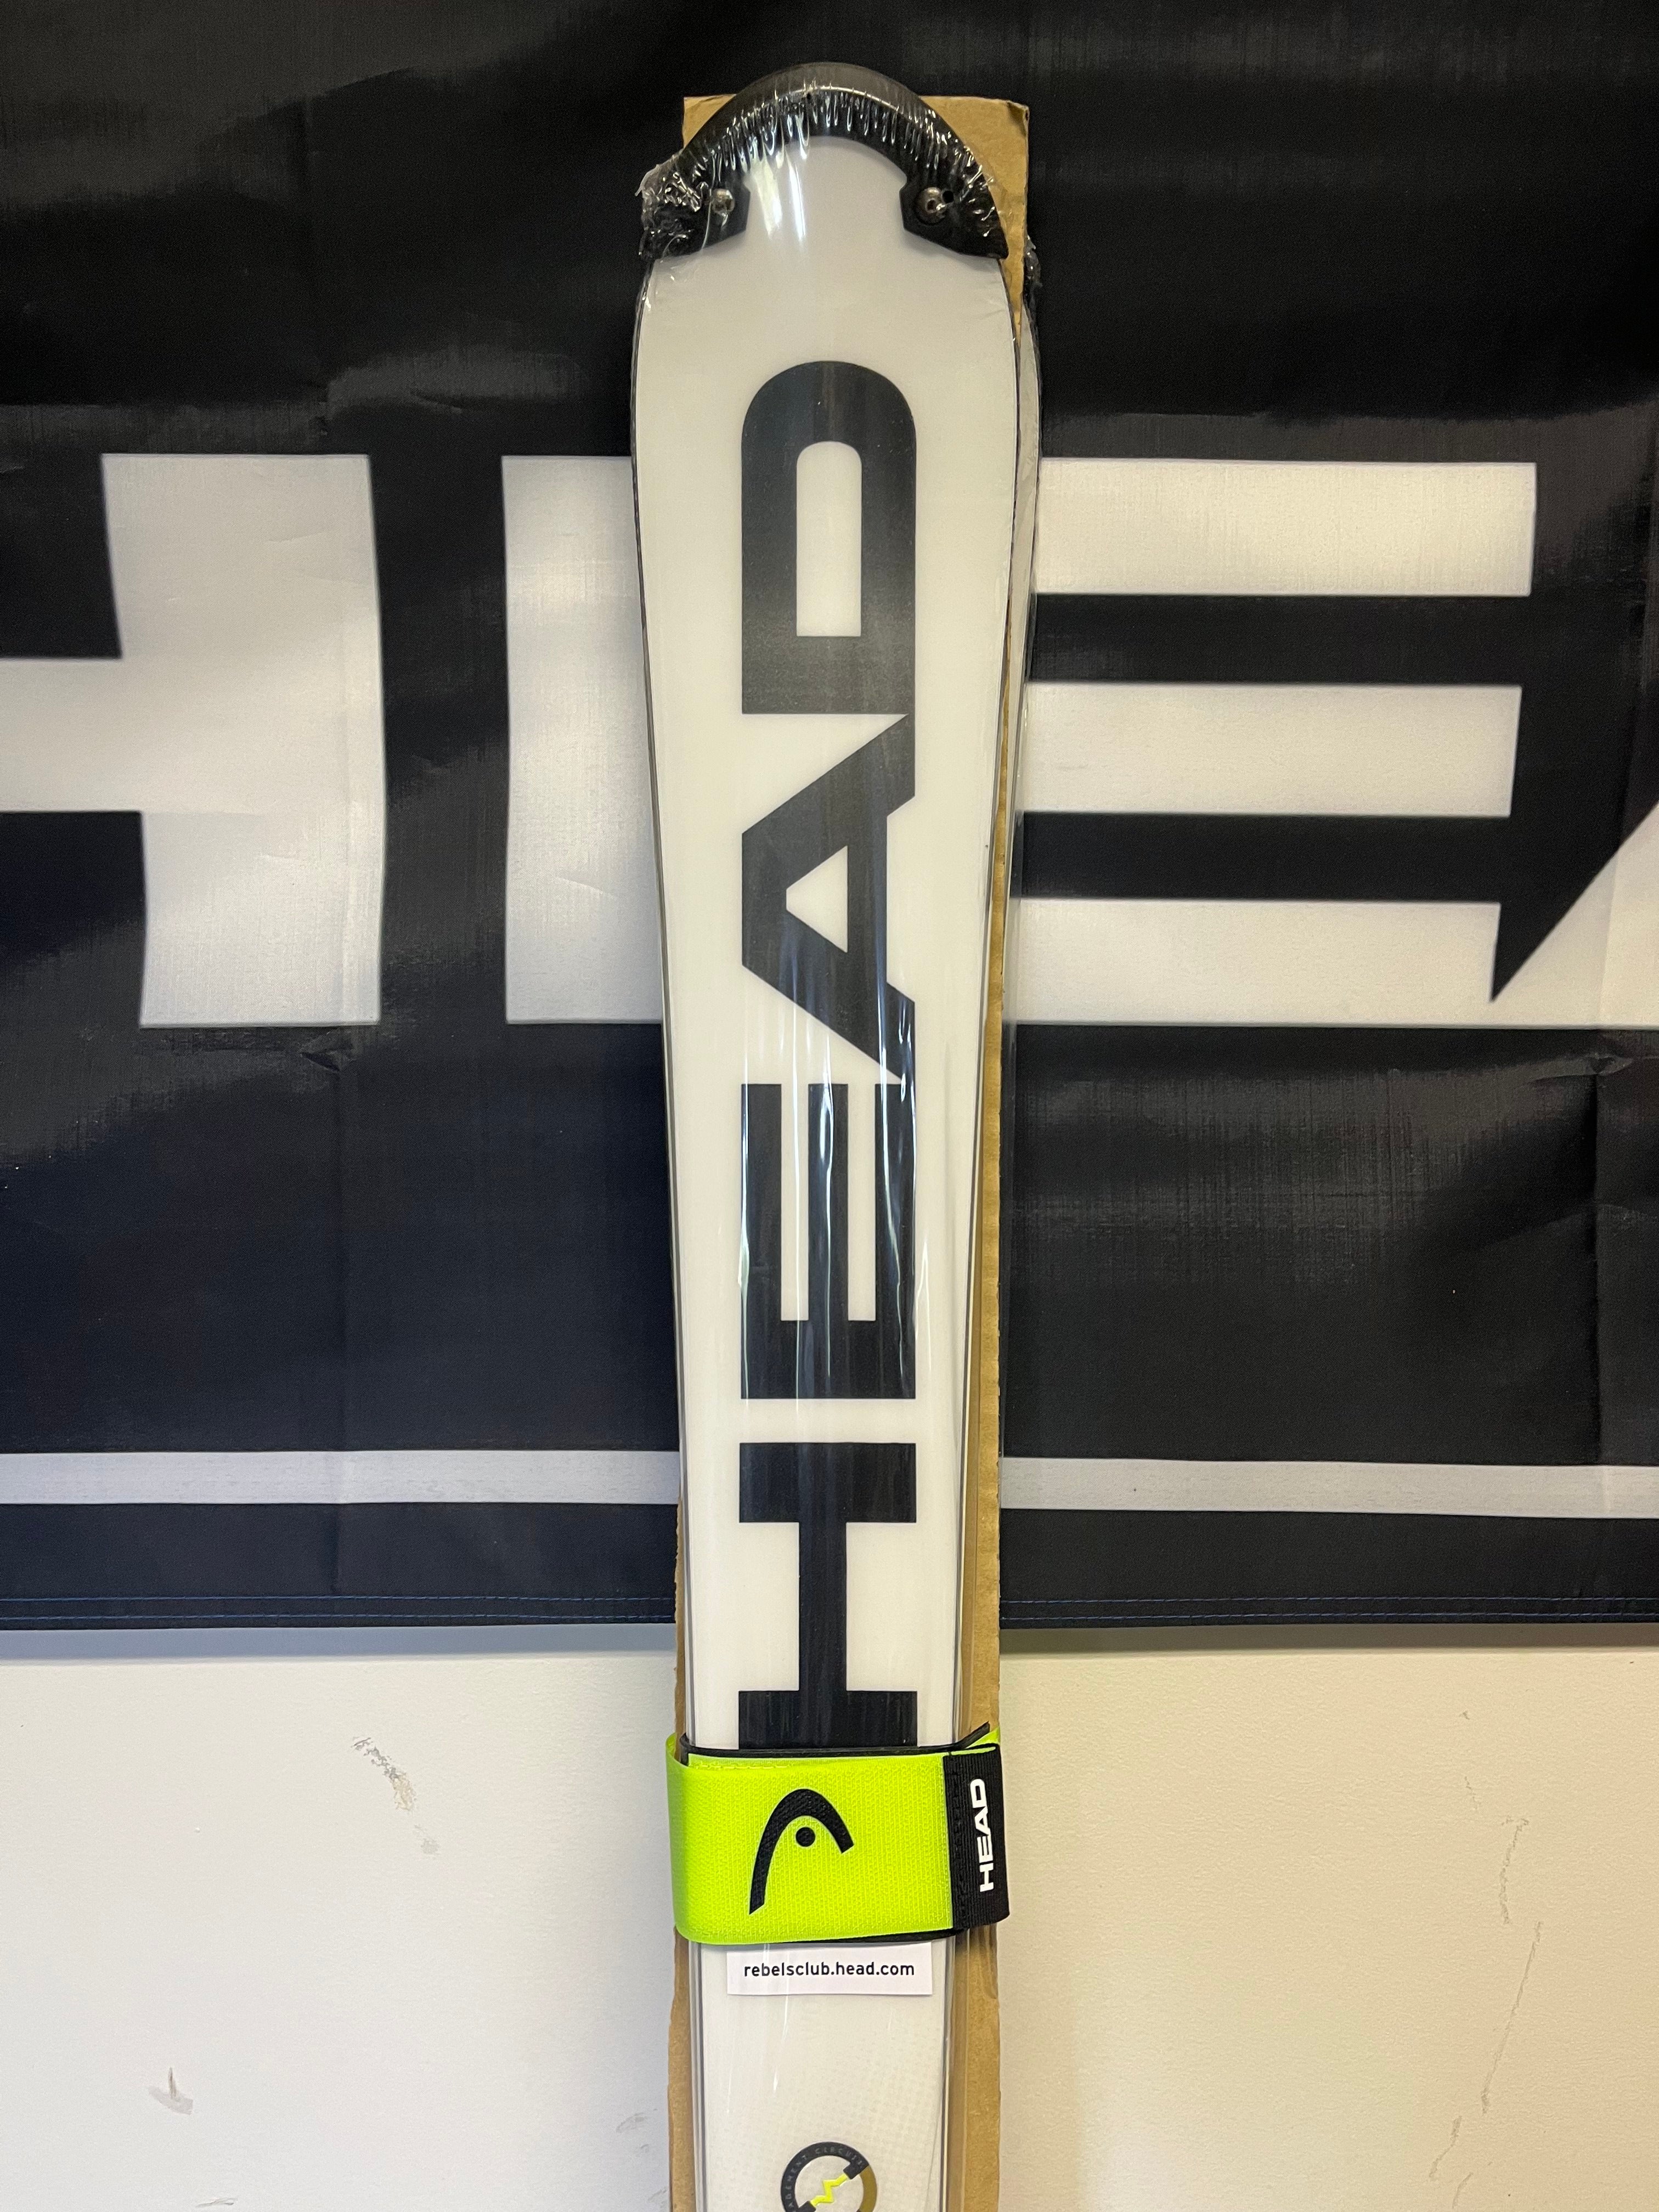 New 2023 HEAD Factory special 165 cm World Cup Rebels e.SL RD Skis 